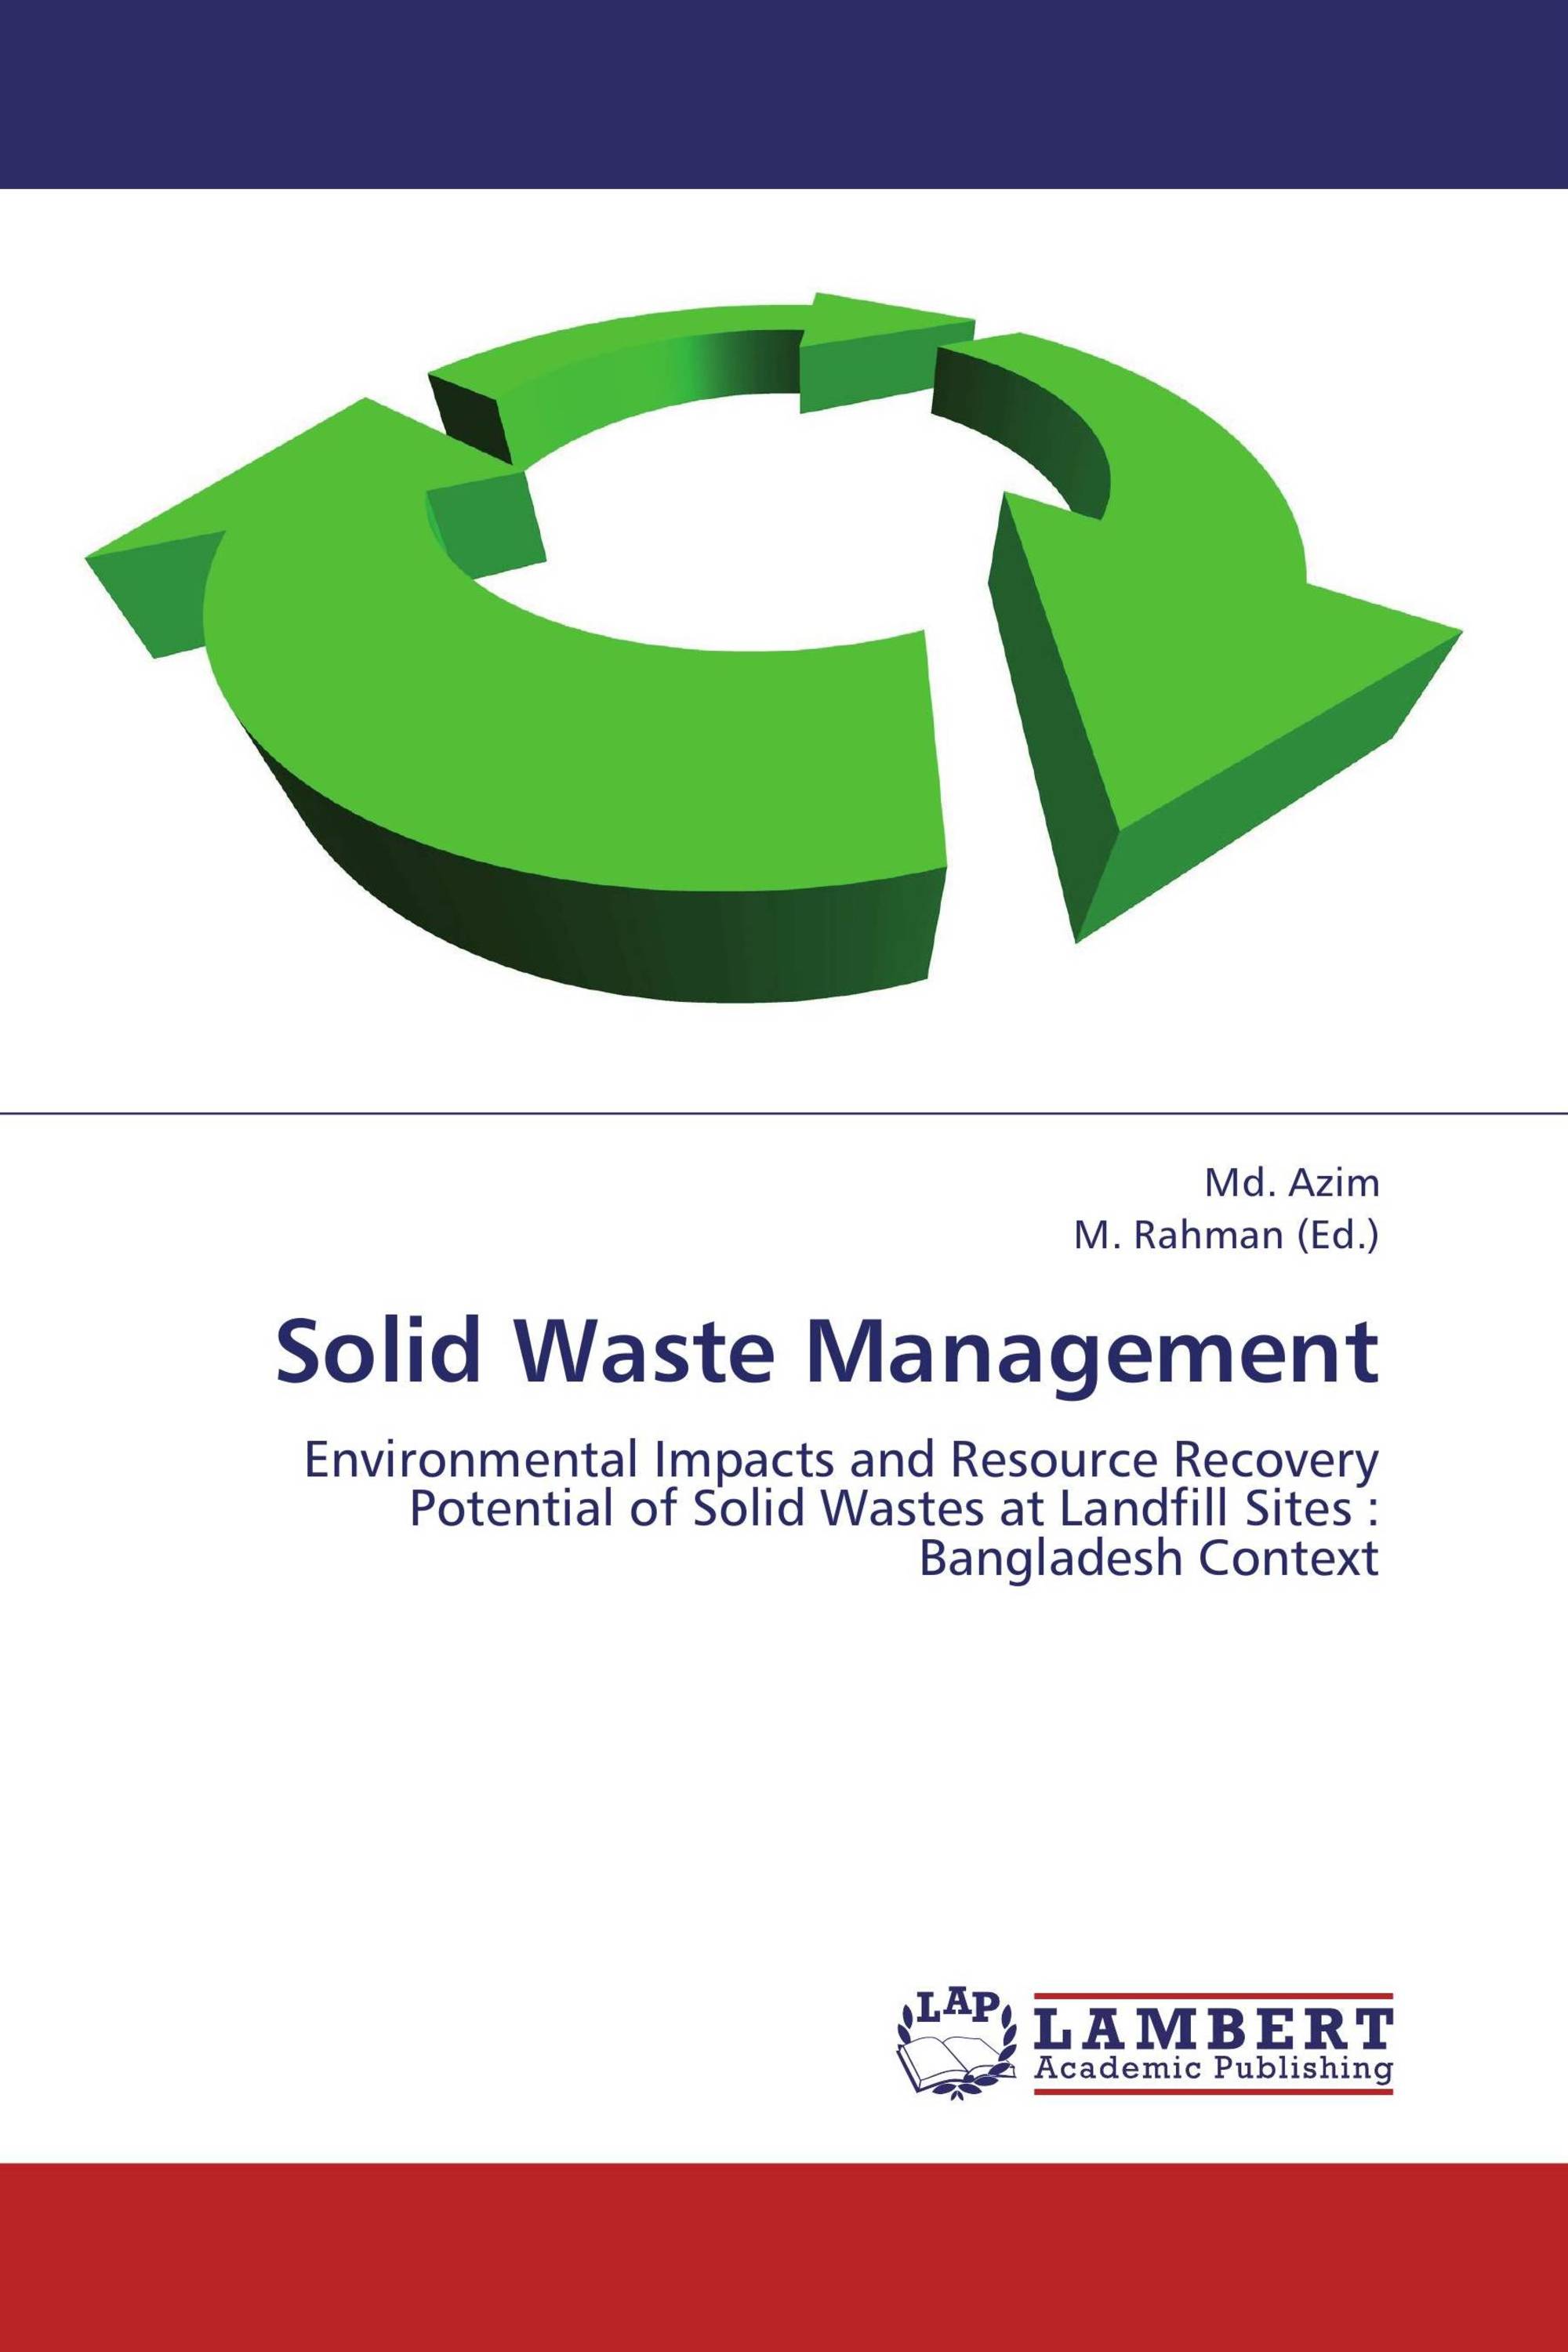 thesis on solid waste management